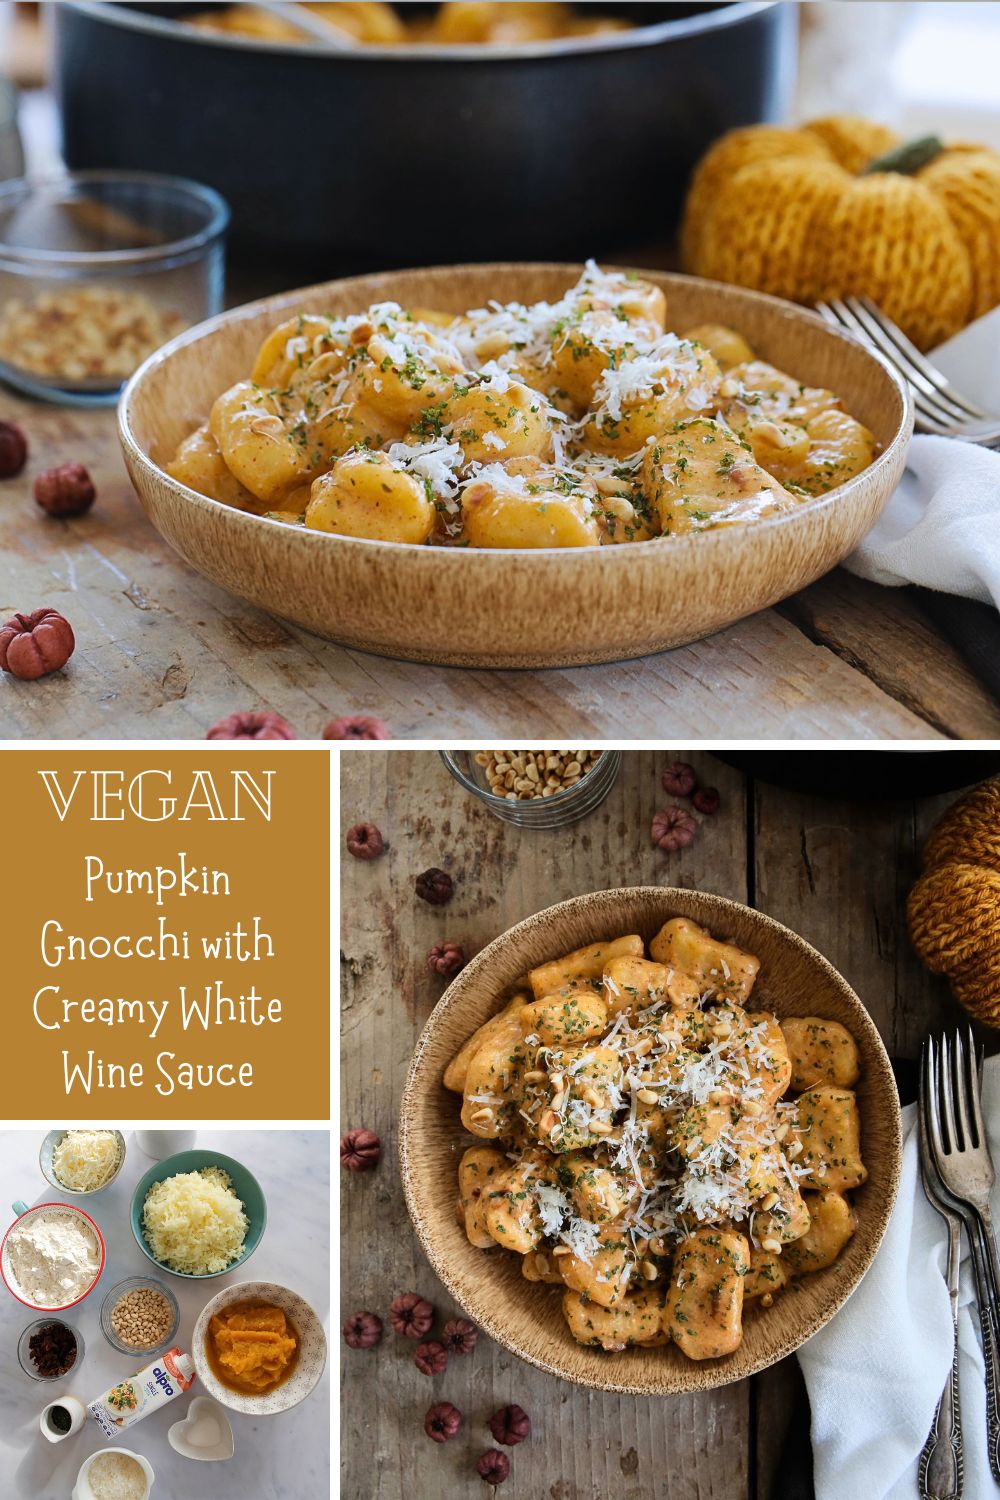 Soft, pillowy vegan pumpkin gnocchi in a rich and creamy white wine sauce with sun dried tomatoes. Delicious autumn comfort food! Recipe on thecookandhim.com | #gnocchi #vegangnocchi #pumpkingnocchi #autumnrecipes #fallrecipes